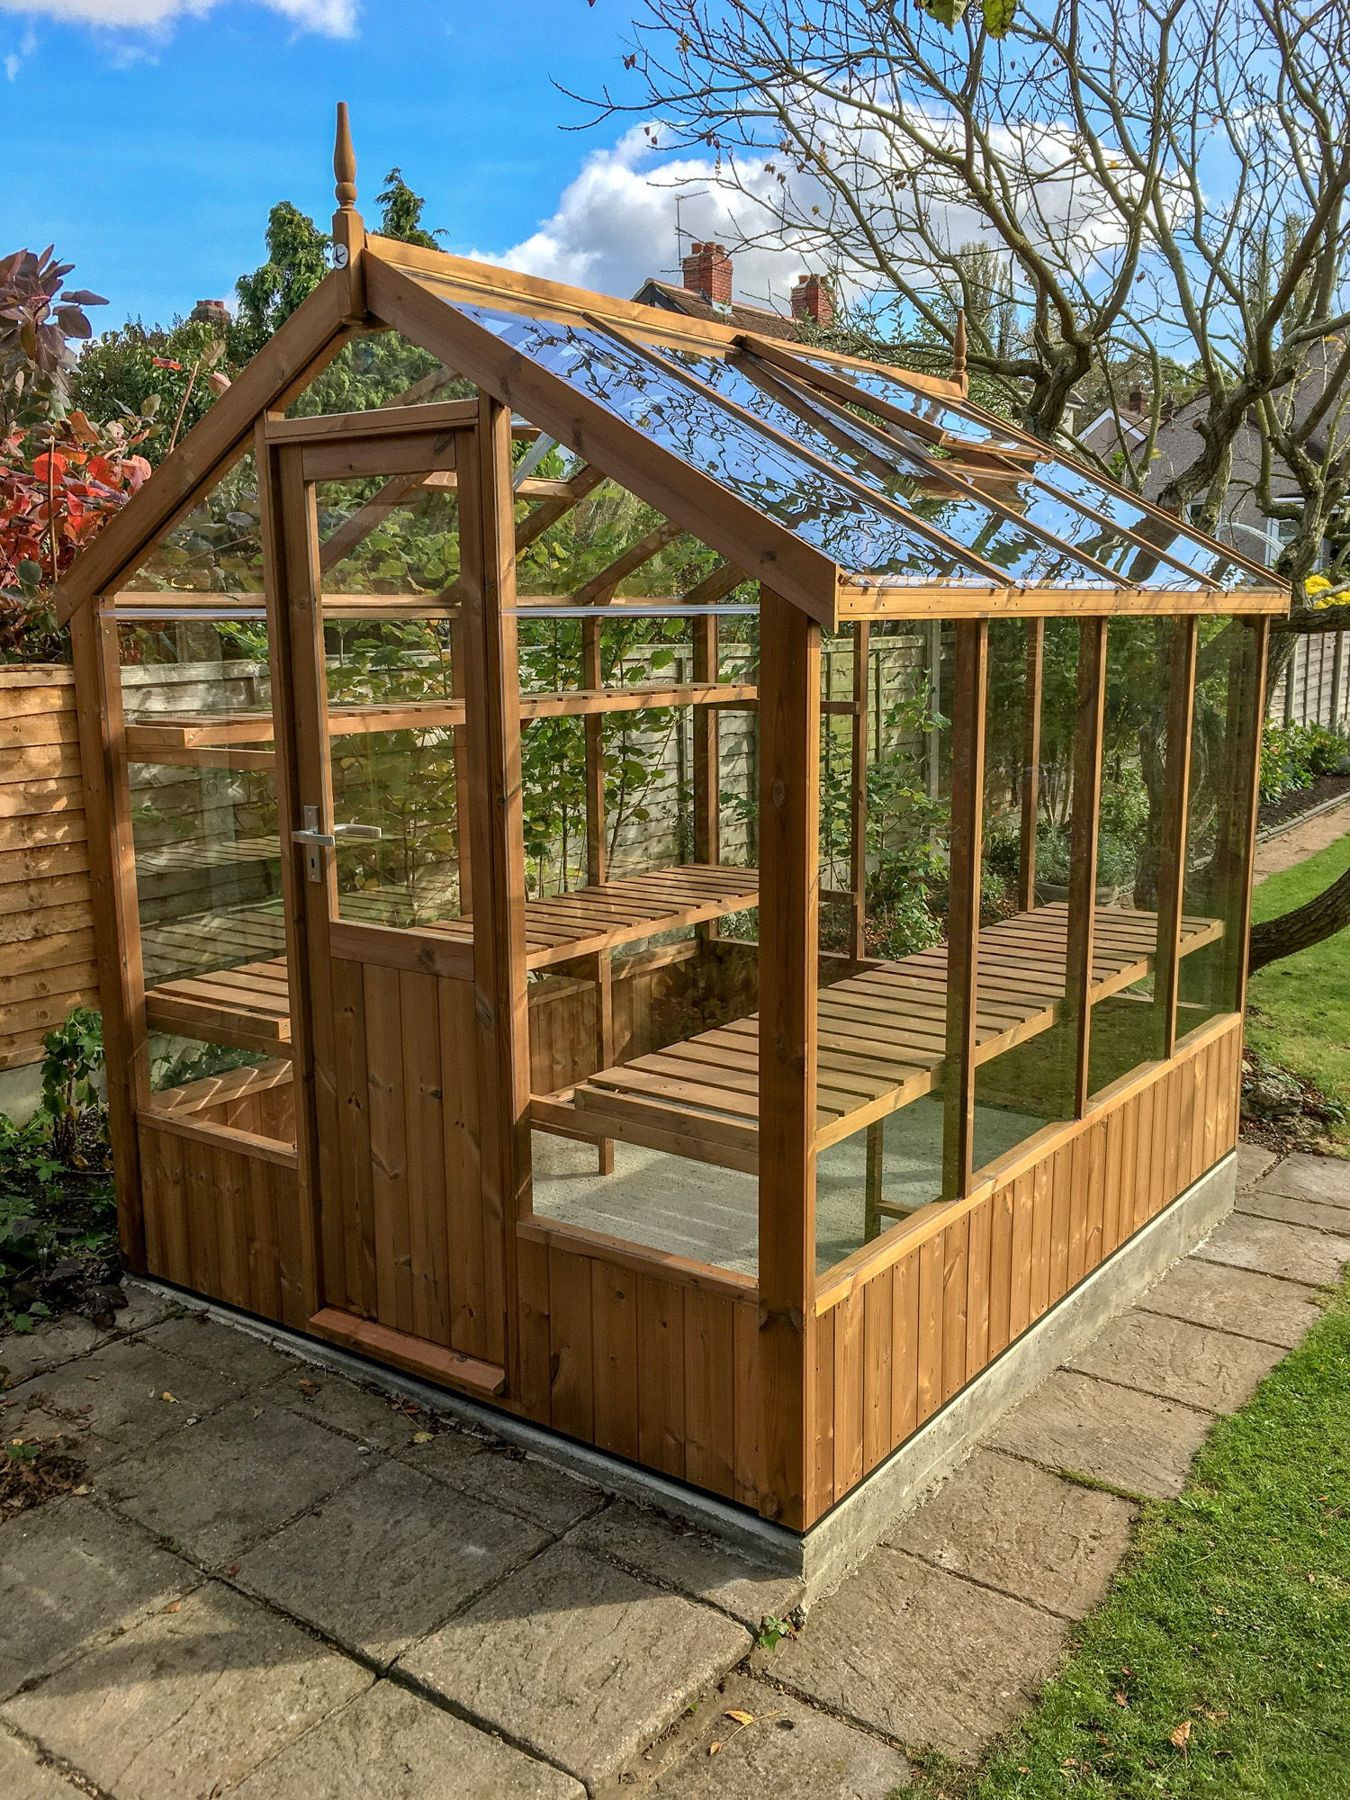 DIY Wooden Greenhouse
 Swallow Kingfisher 6x8 Wooden Greenhouse